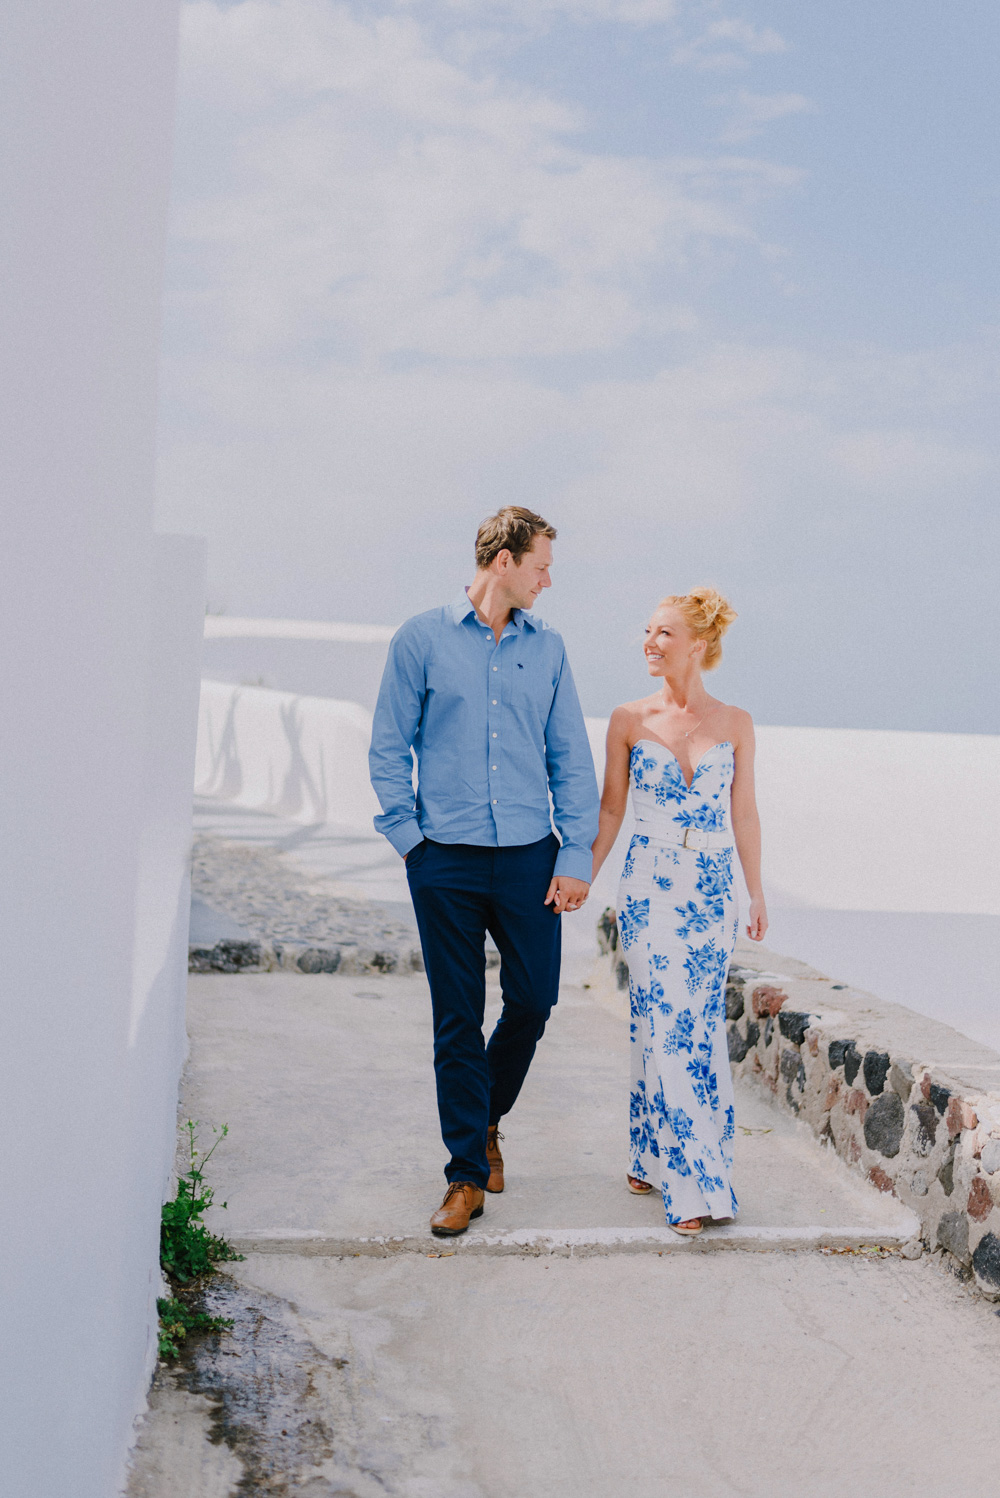 Engagement Photo Ideas: What to wear for engagement photos